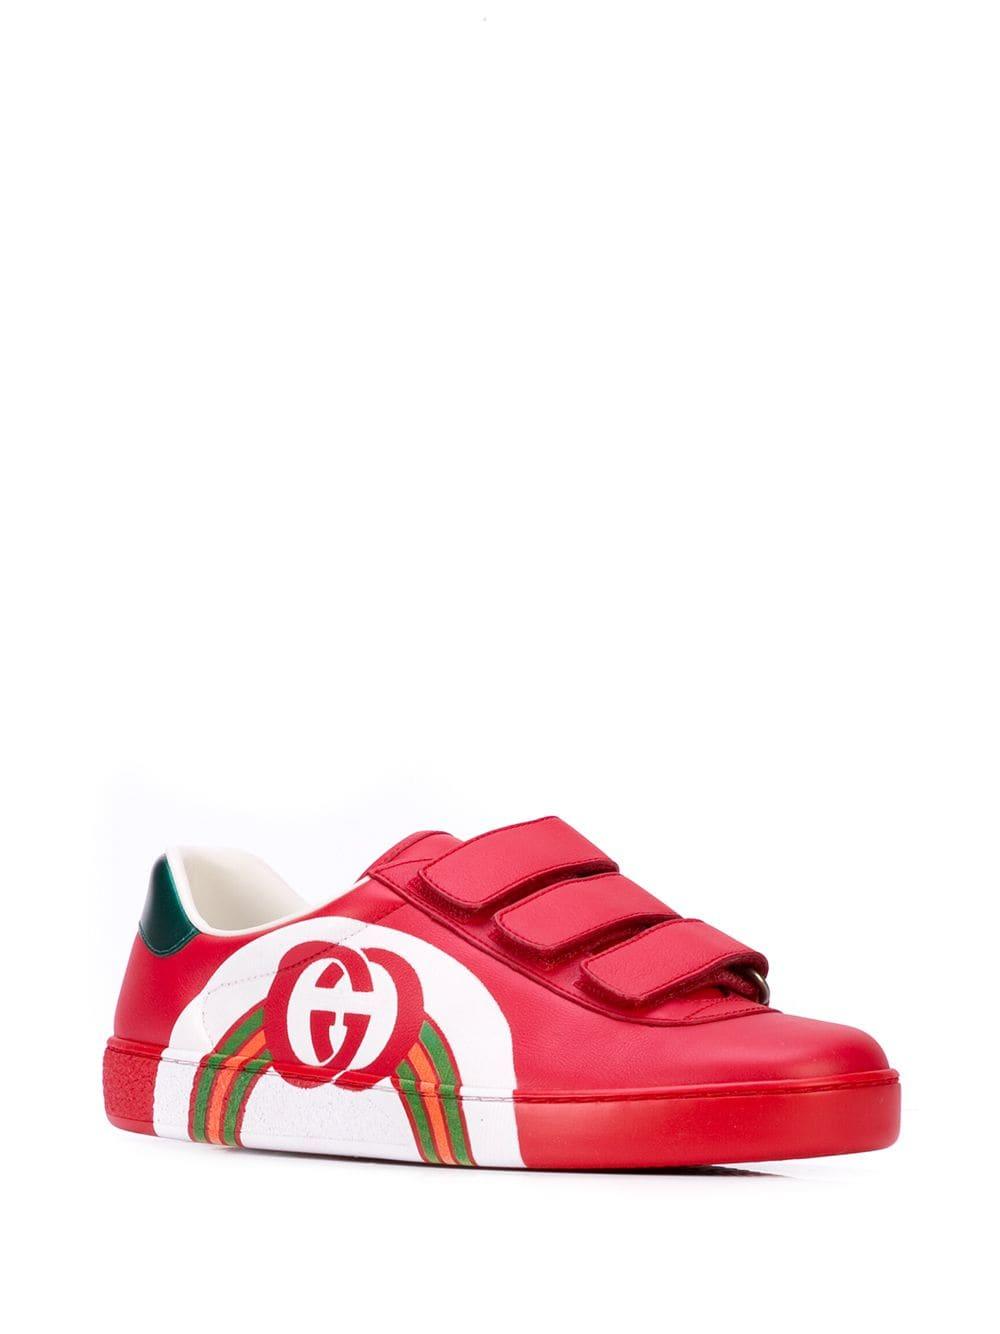 gucci sneaker red